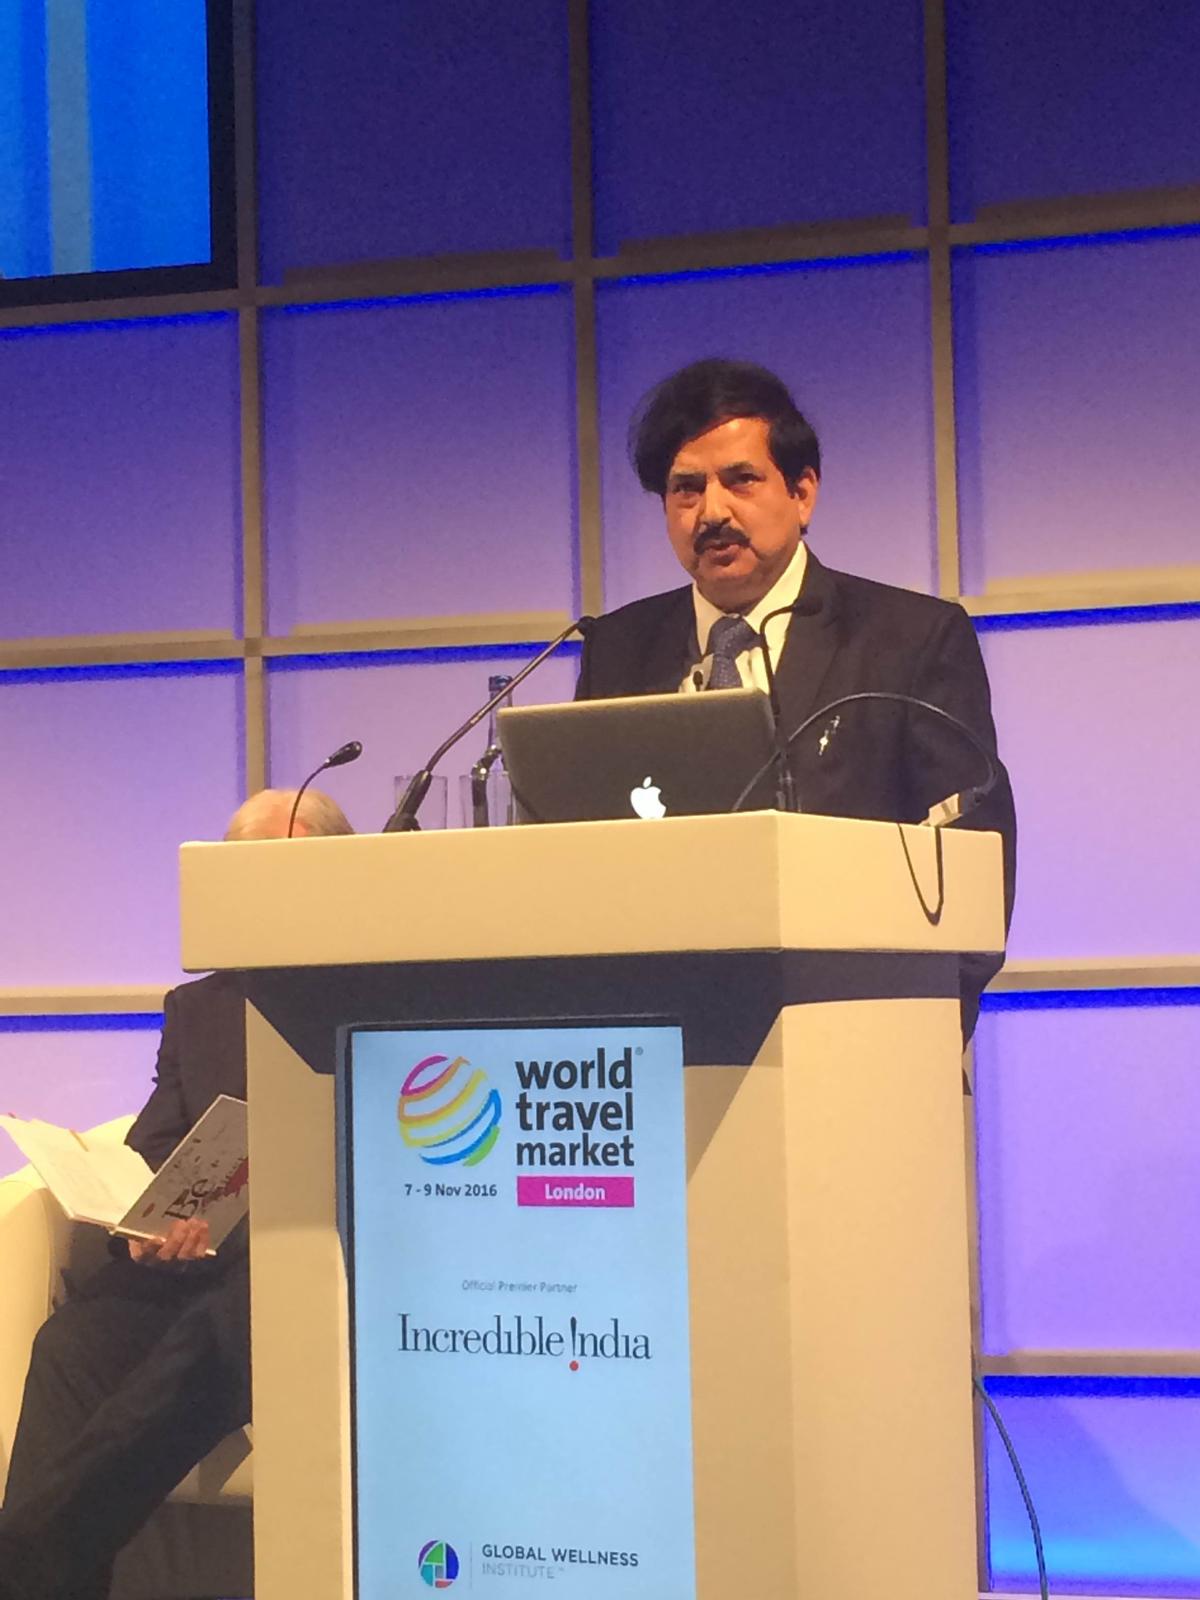 Vinod Zutshi, secretary of tourism for India, looked at how the Indian government has successfully backed up wellness programmes across the country during a panel at the World Travel Market in London / 